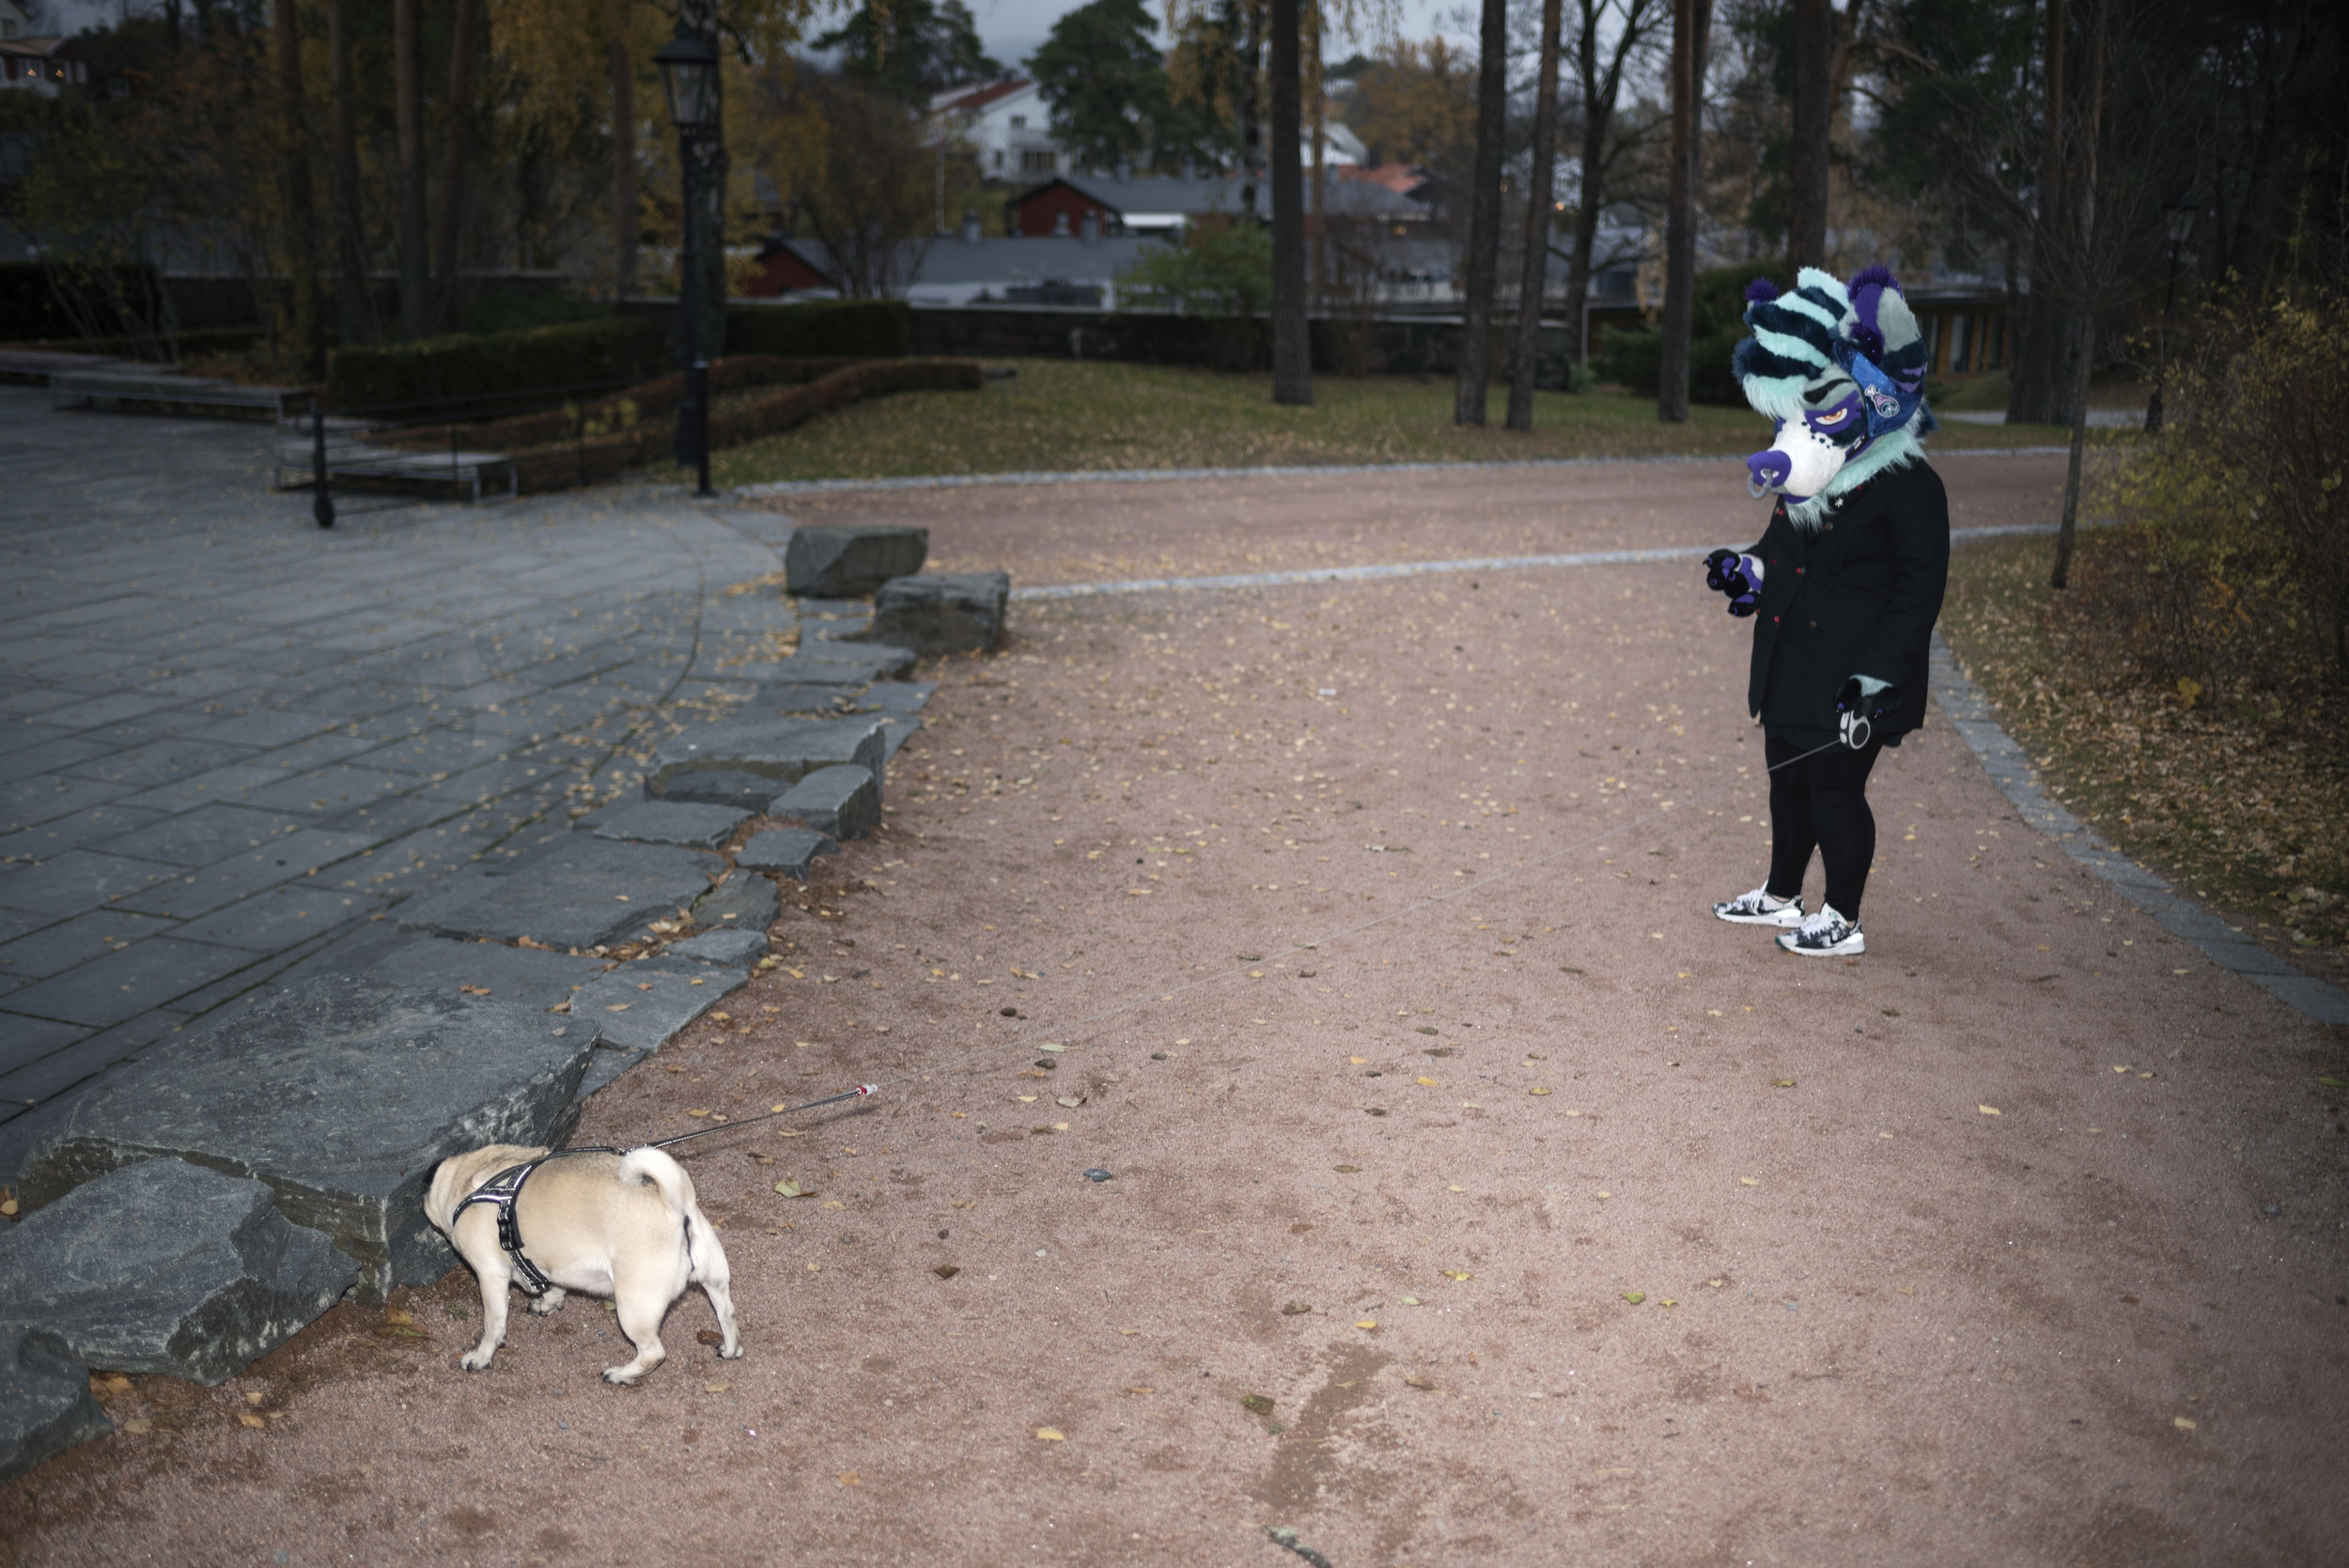  Camilla Brosstad and her dog Lotte. For VG Helg, 2018. 